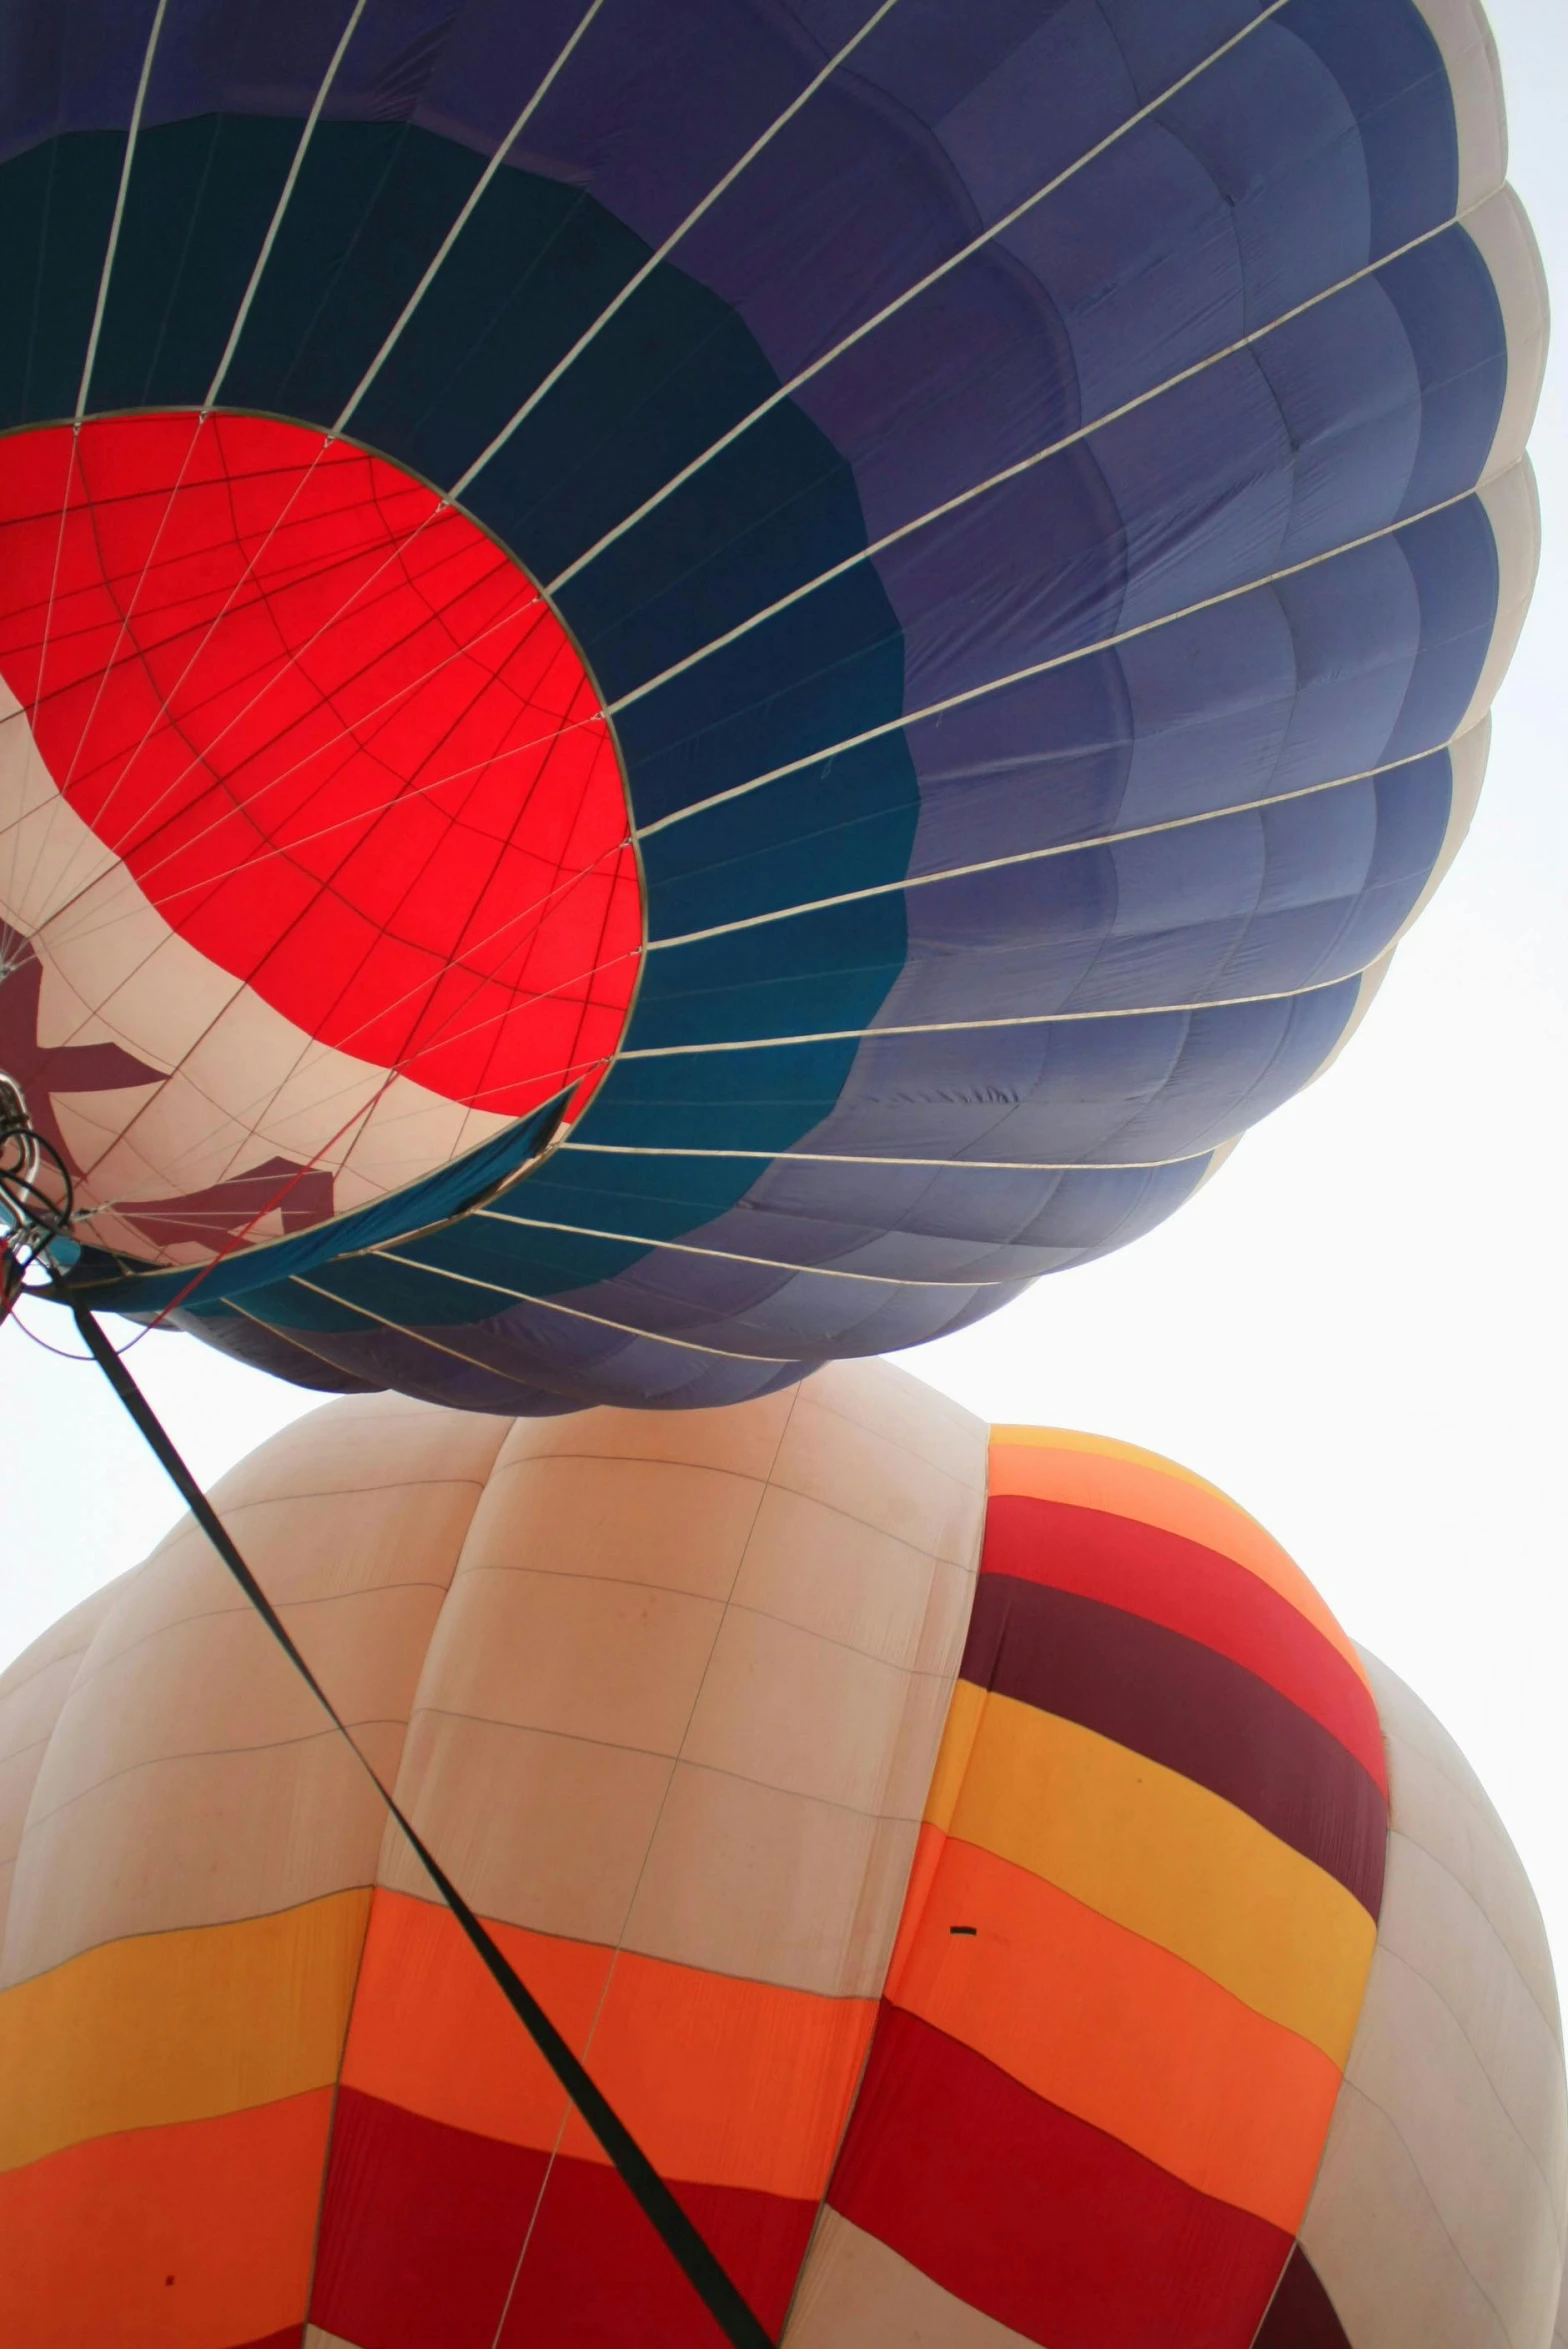 a couple of hot air balloons that are flying in the sky, up close, laos, complimentary colours, helmet view